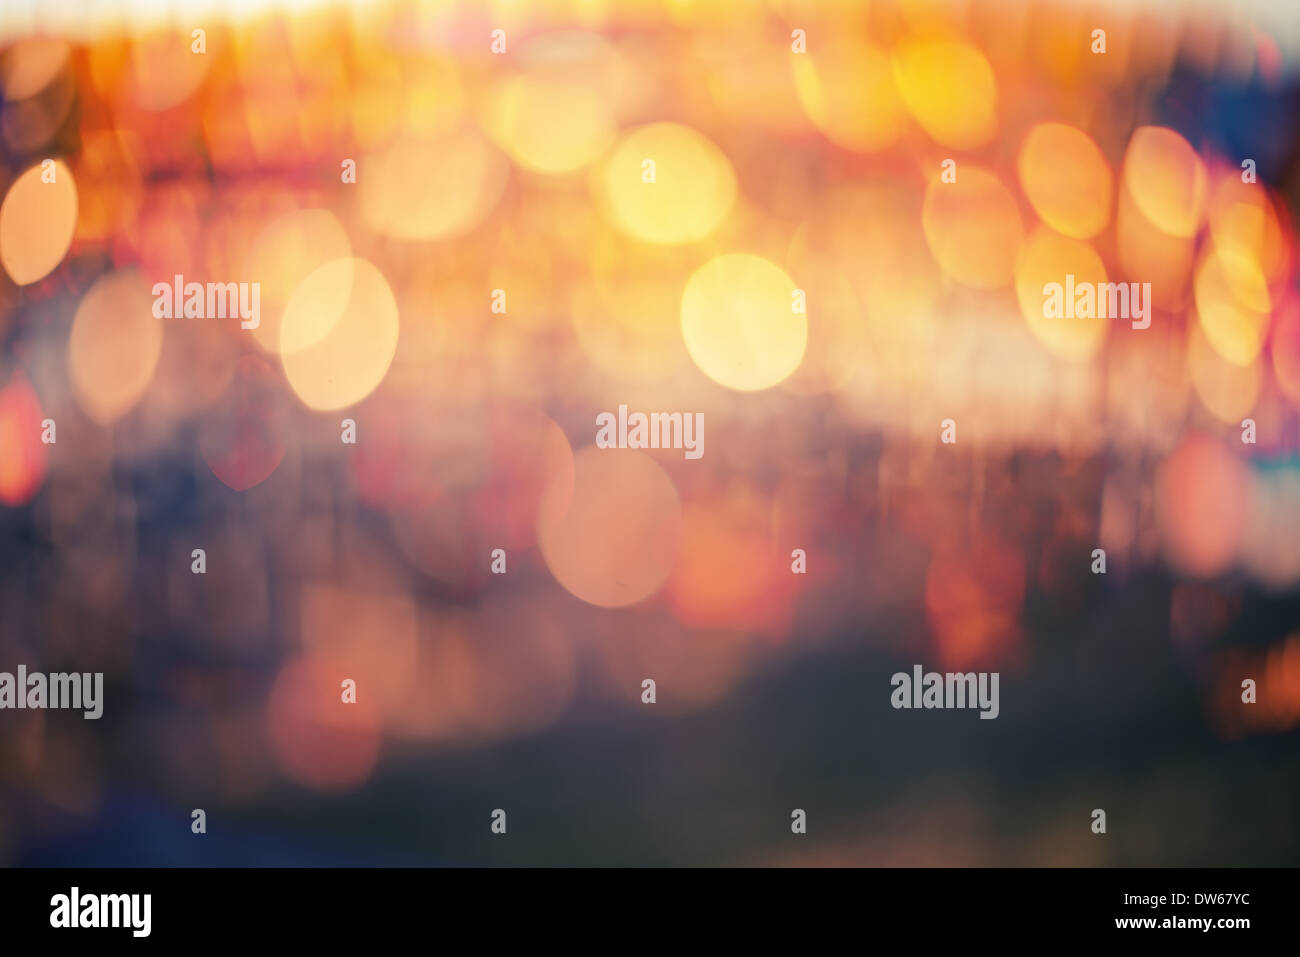 Abstract blurry background Stock Photo